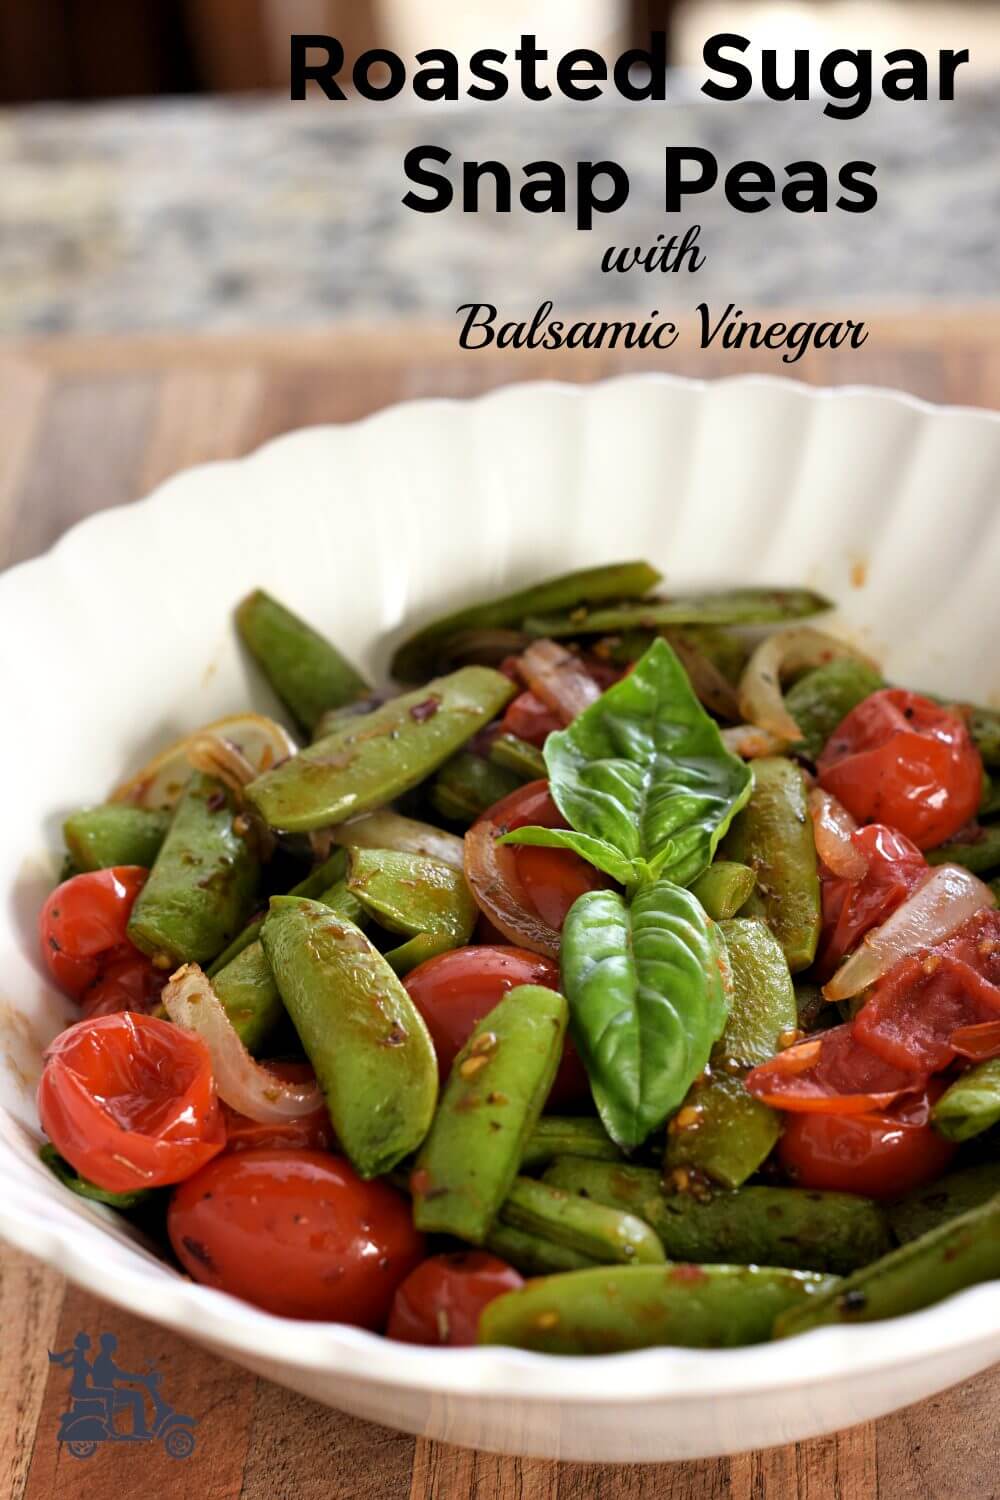 Sweet sugar snap peas, onions and grape tomatoes roast with spicy red pepper flakes and Italian seasoning. The quick vegetable side finishes with a touch of balsamic vinegar to balance the sweetness with a touch of tang. A company worthy vegetable that is easy to throw together.